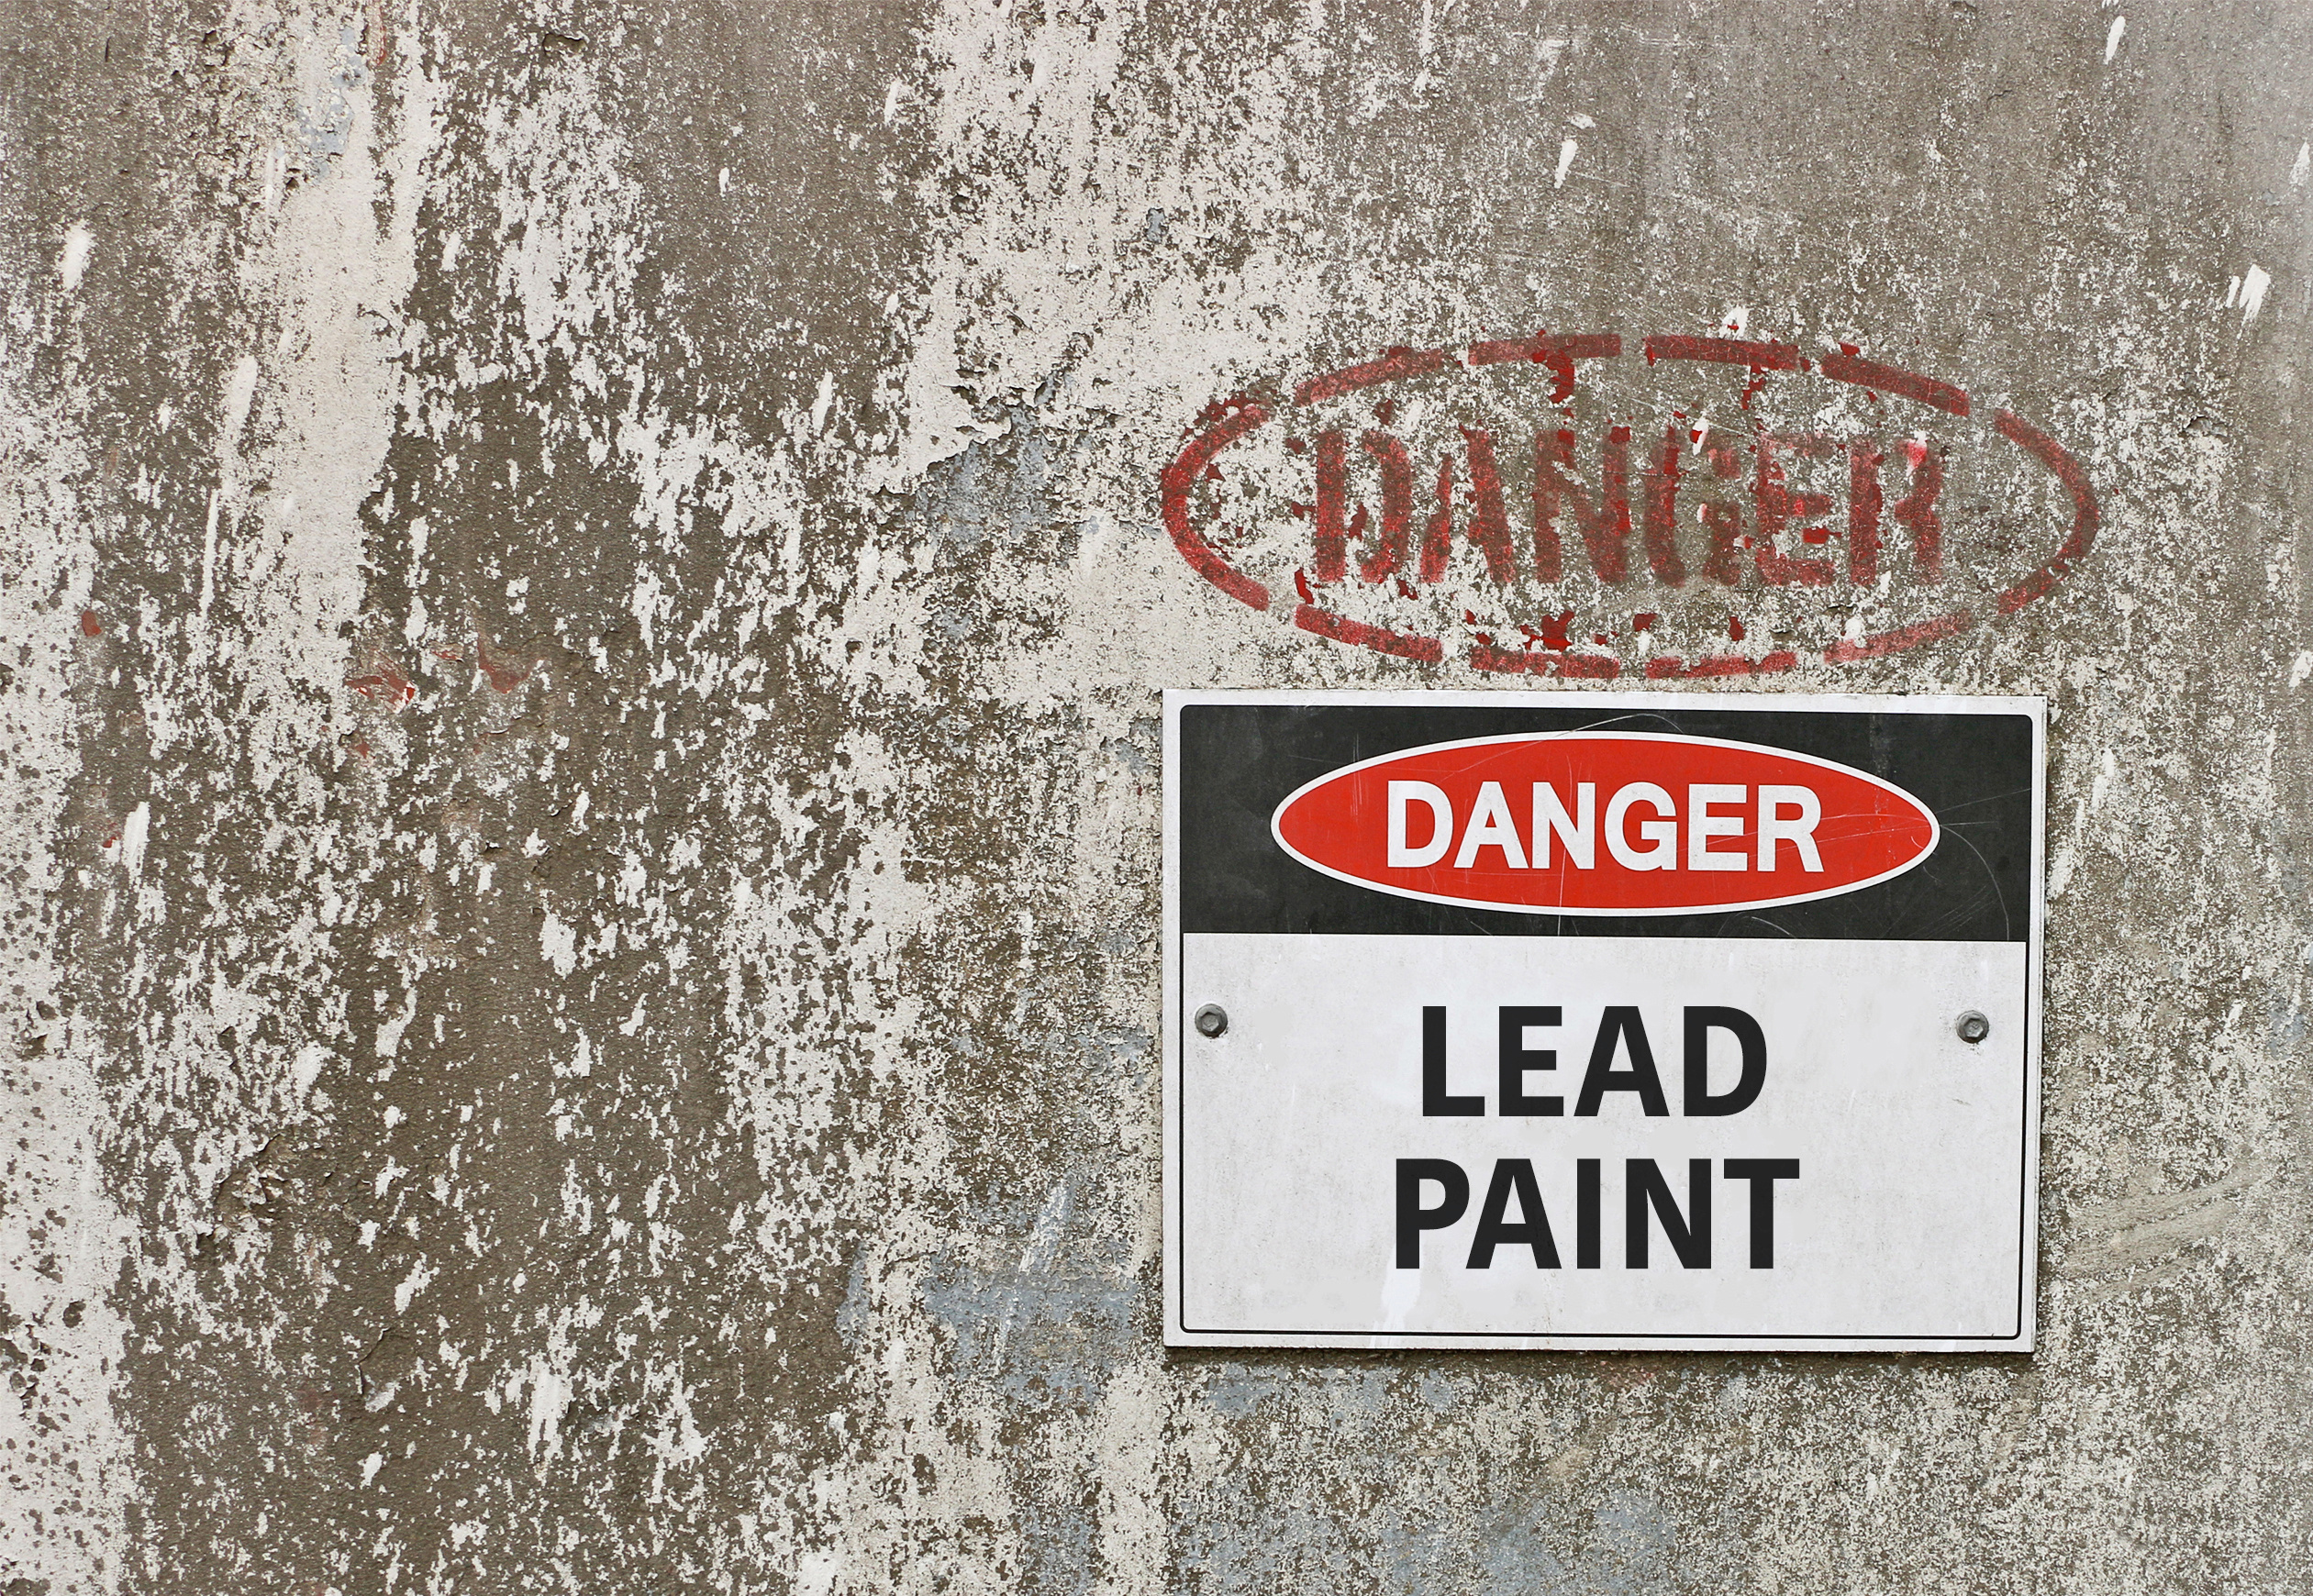 Lead paint warning sign